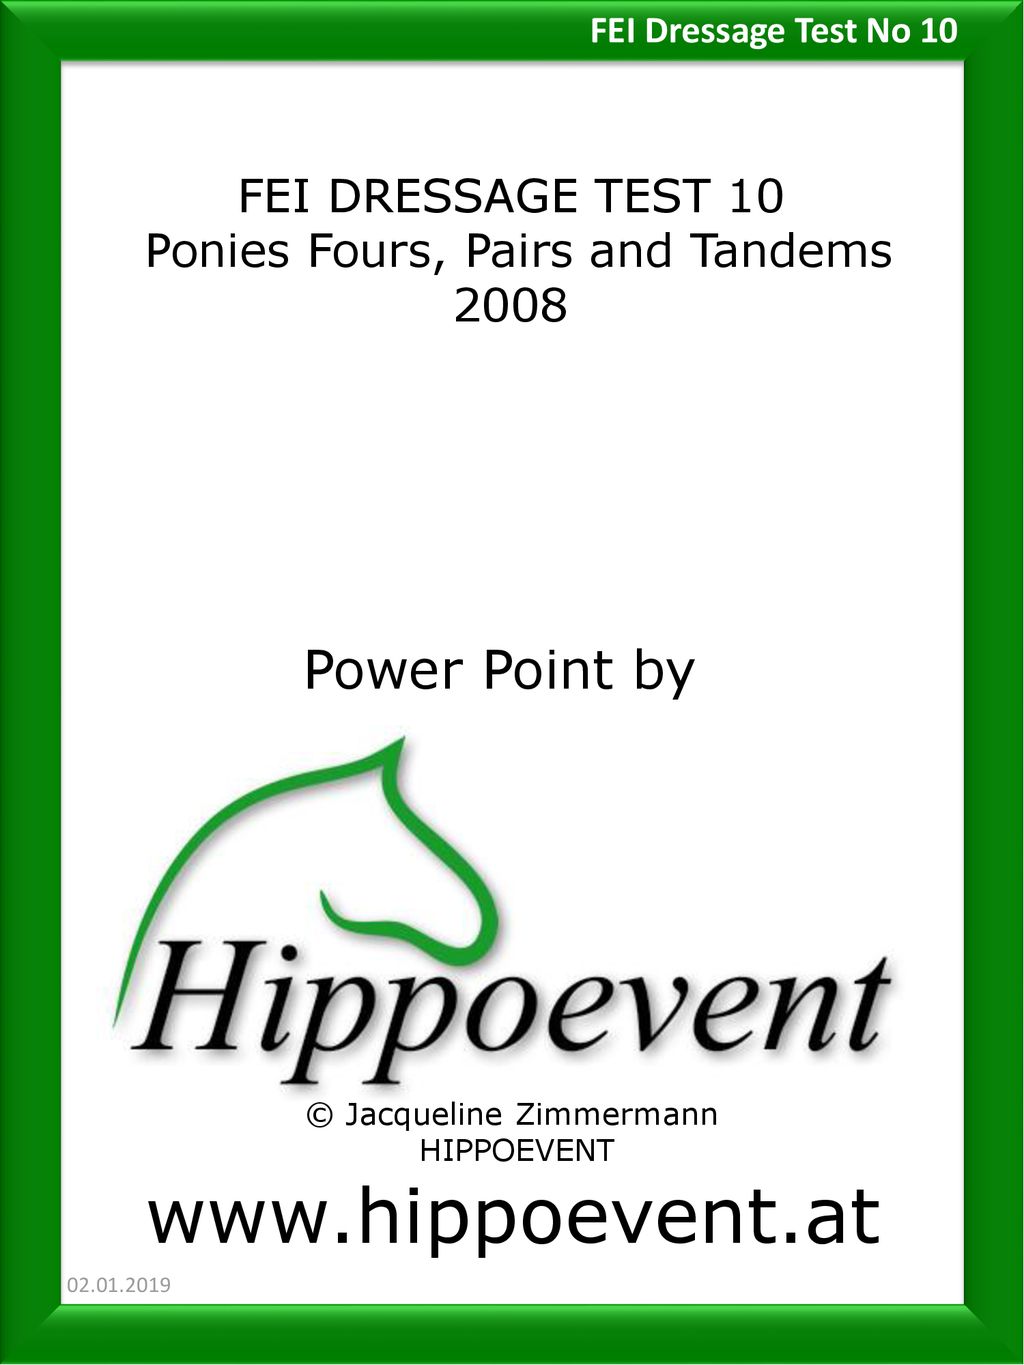 Power Point by FEI DRESSAGE TEST ppt download